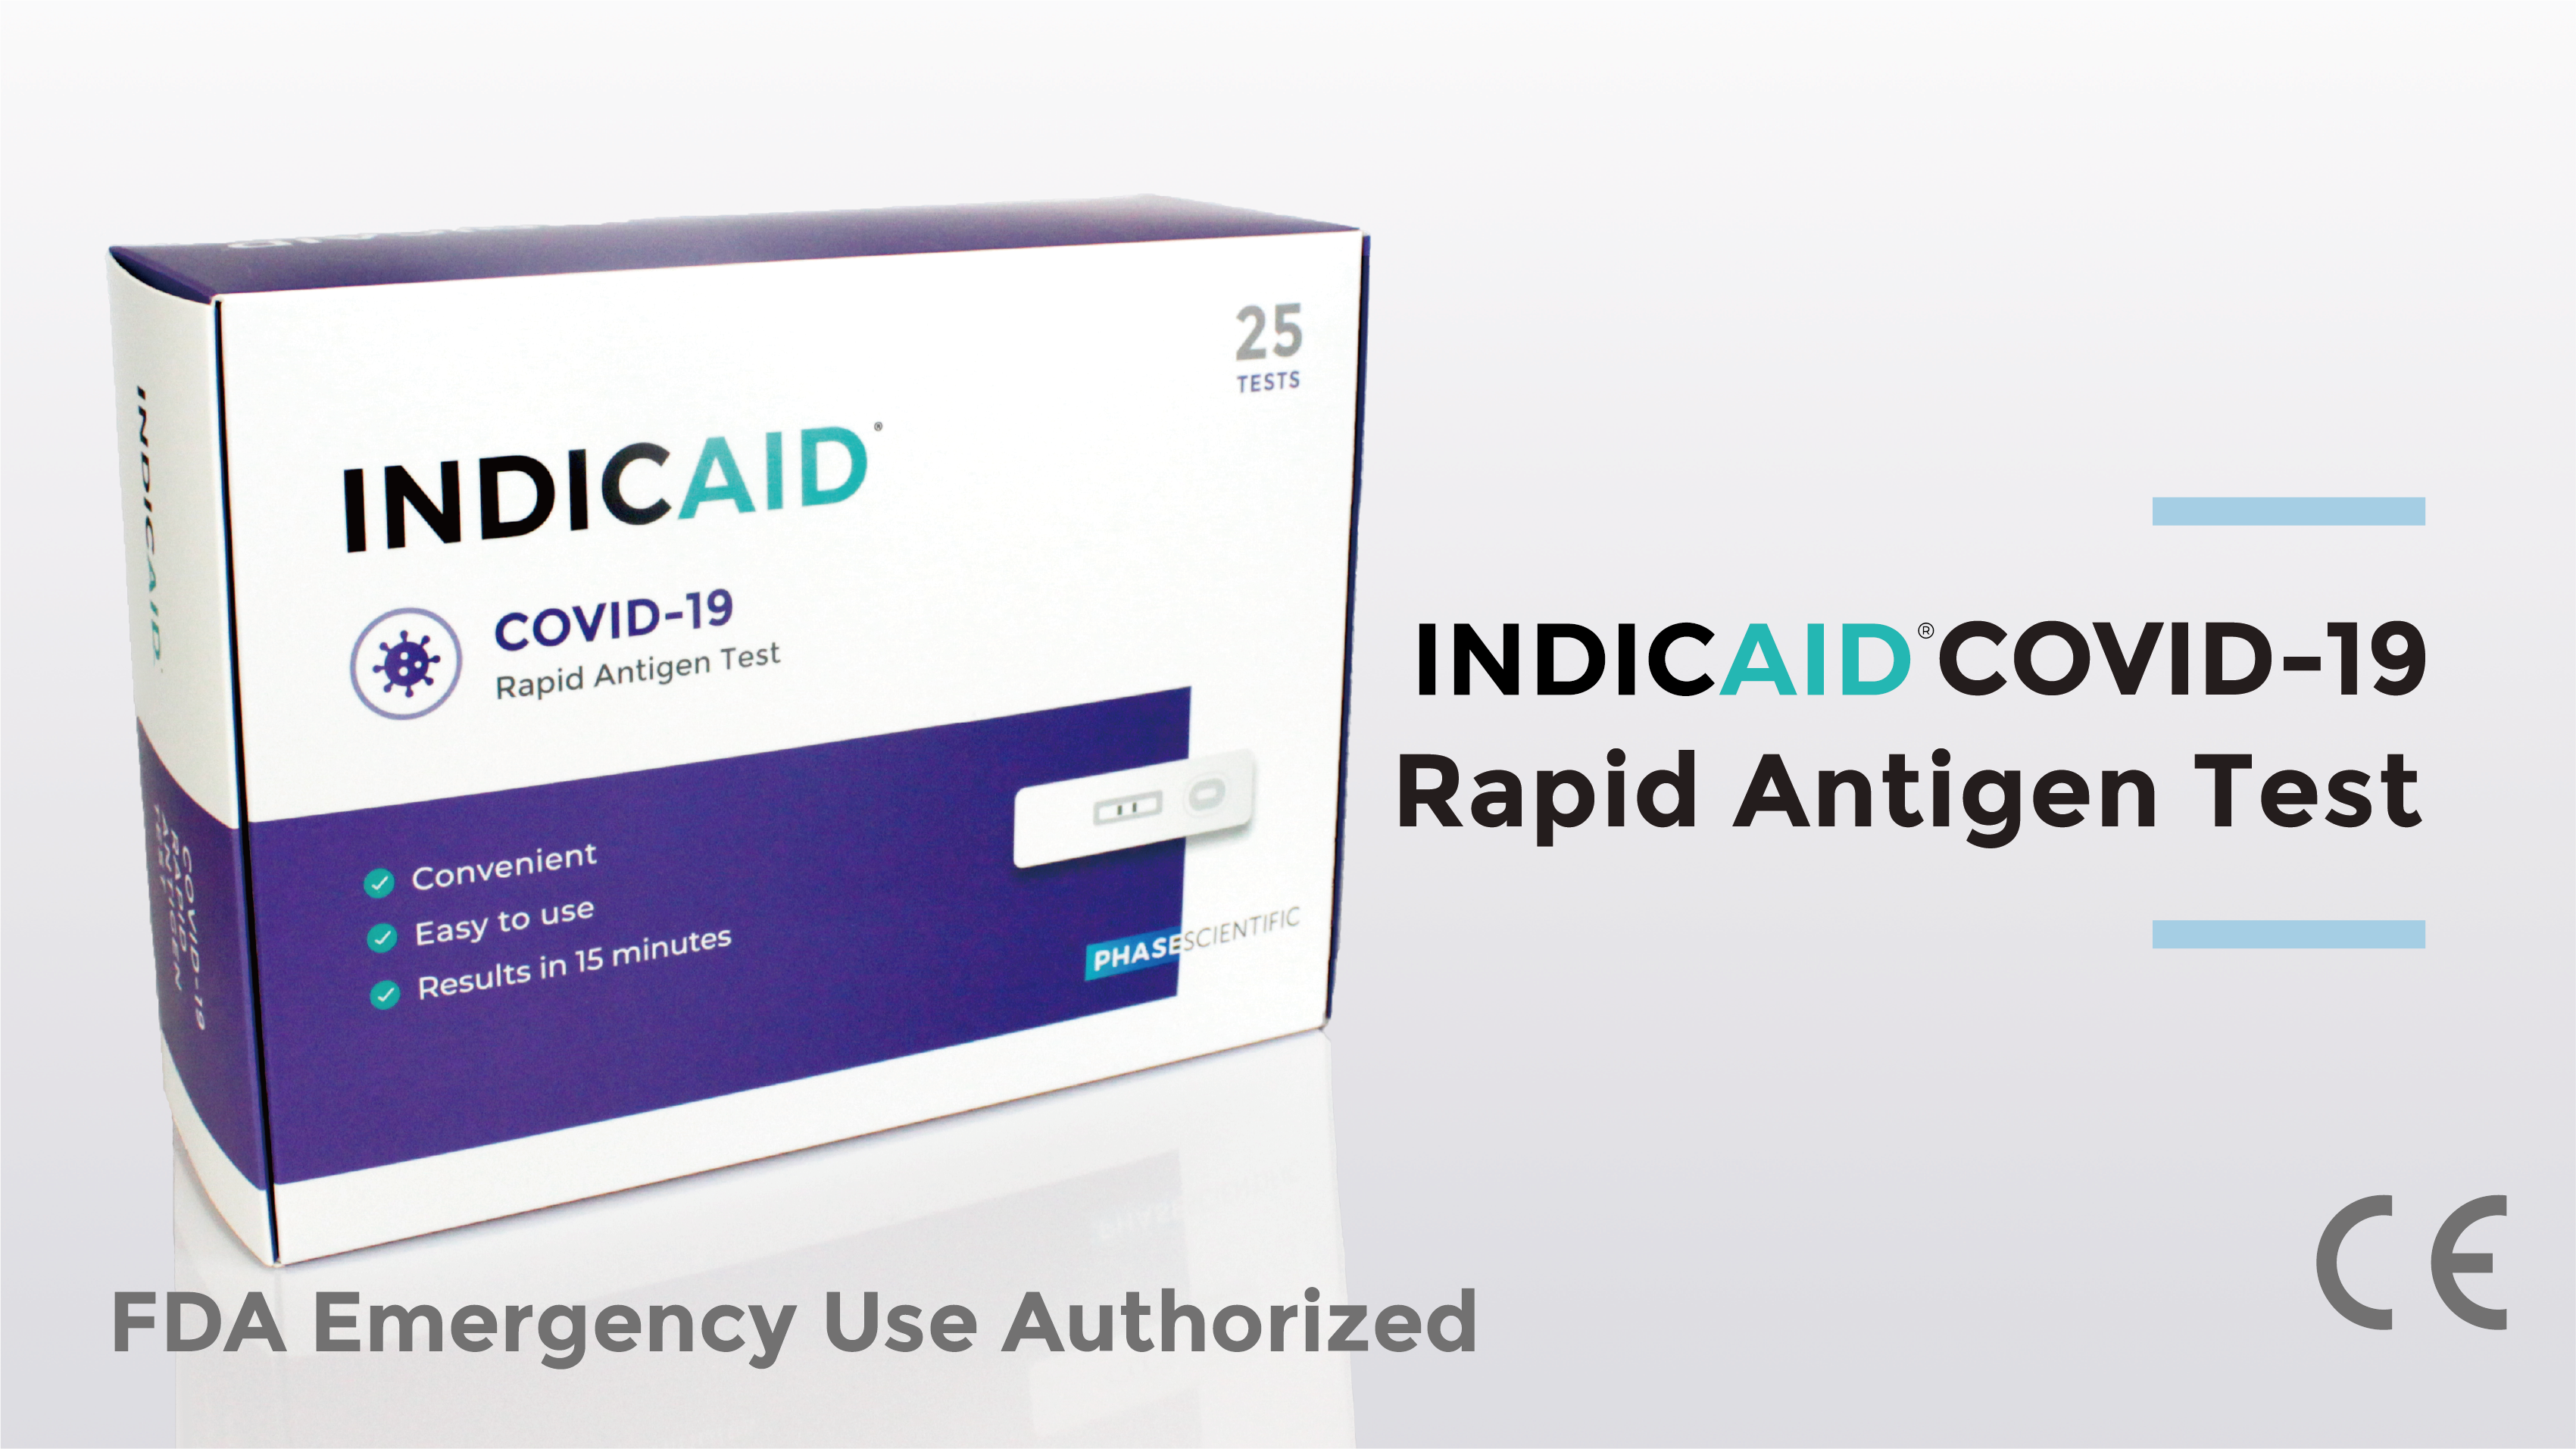 INDICAID™ COVID-19 Rapid Antigen Test Receives Emergency Use Authorization From the U.S. Food and Drug Administration